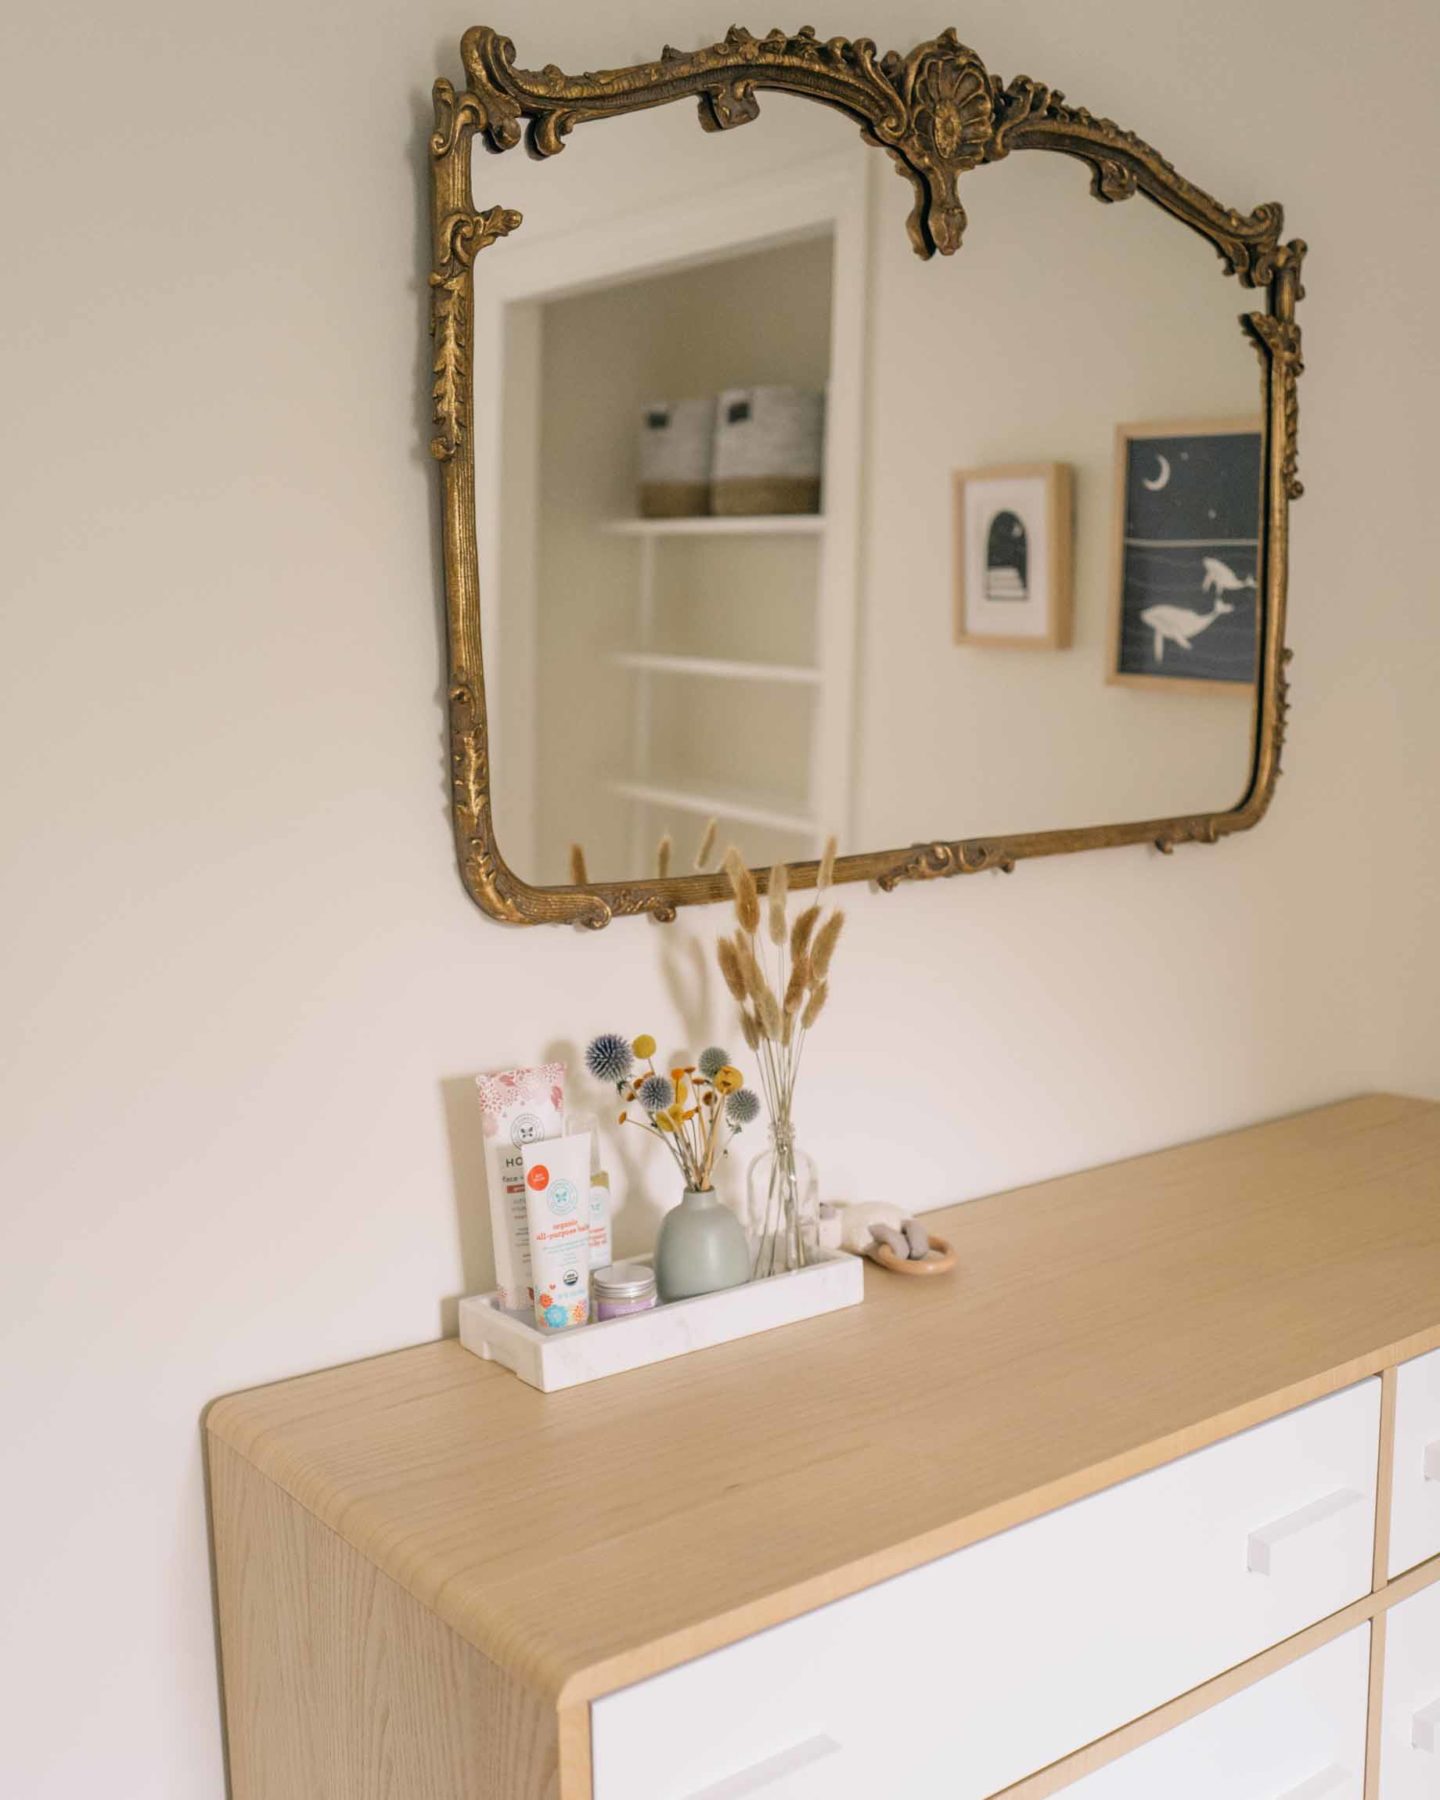 Jess Ann Kirby keeps her new nursery minimal and clean for the arrival of her baby.